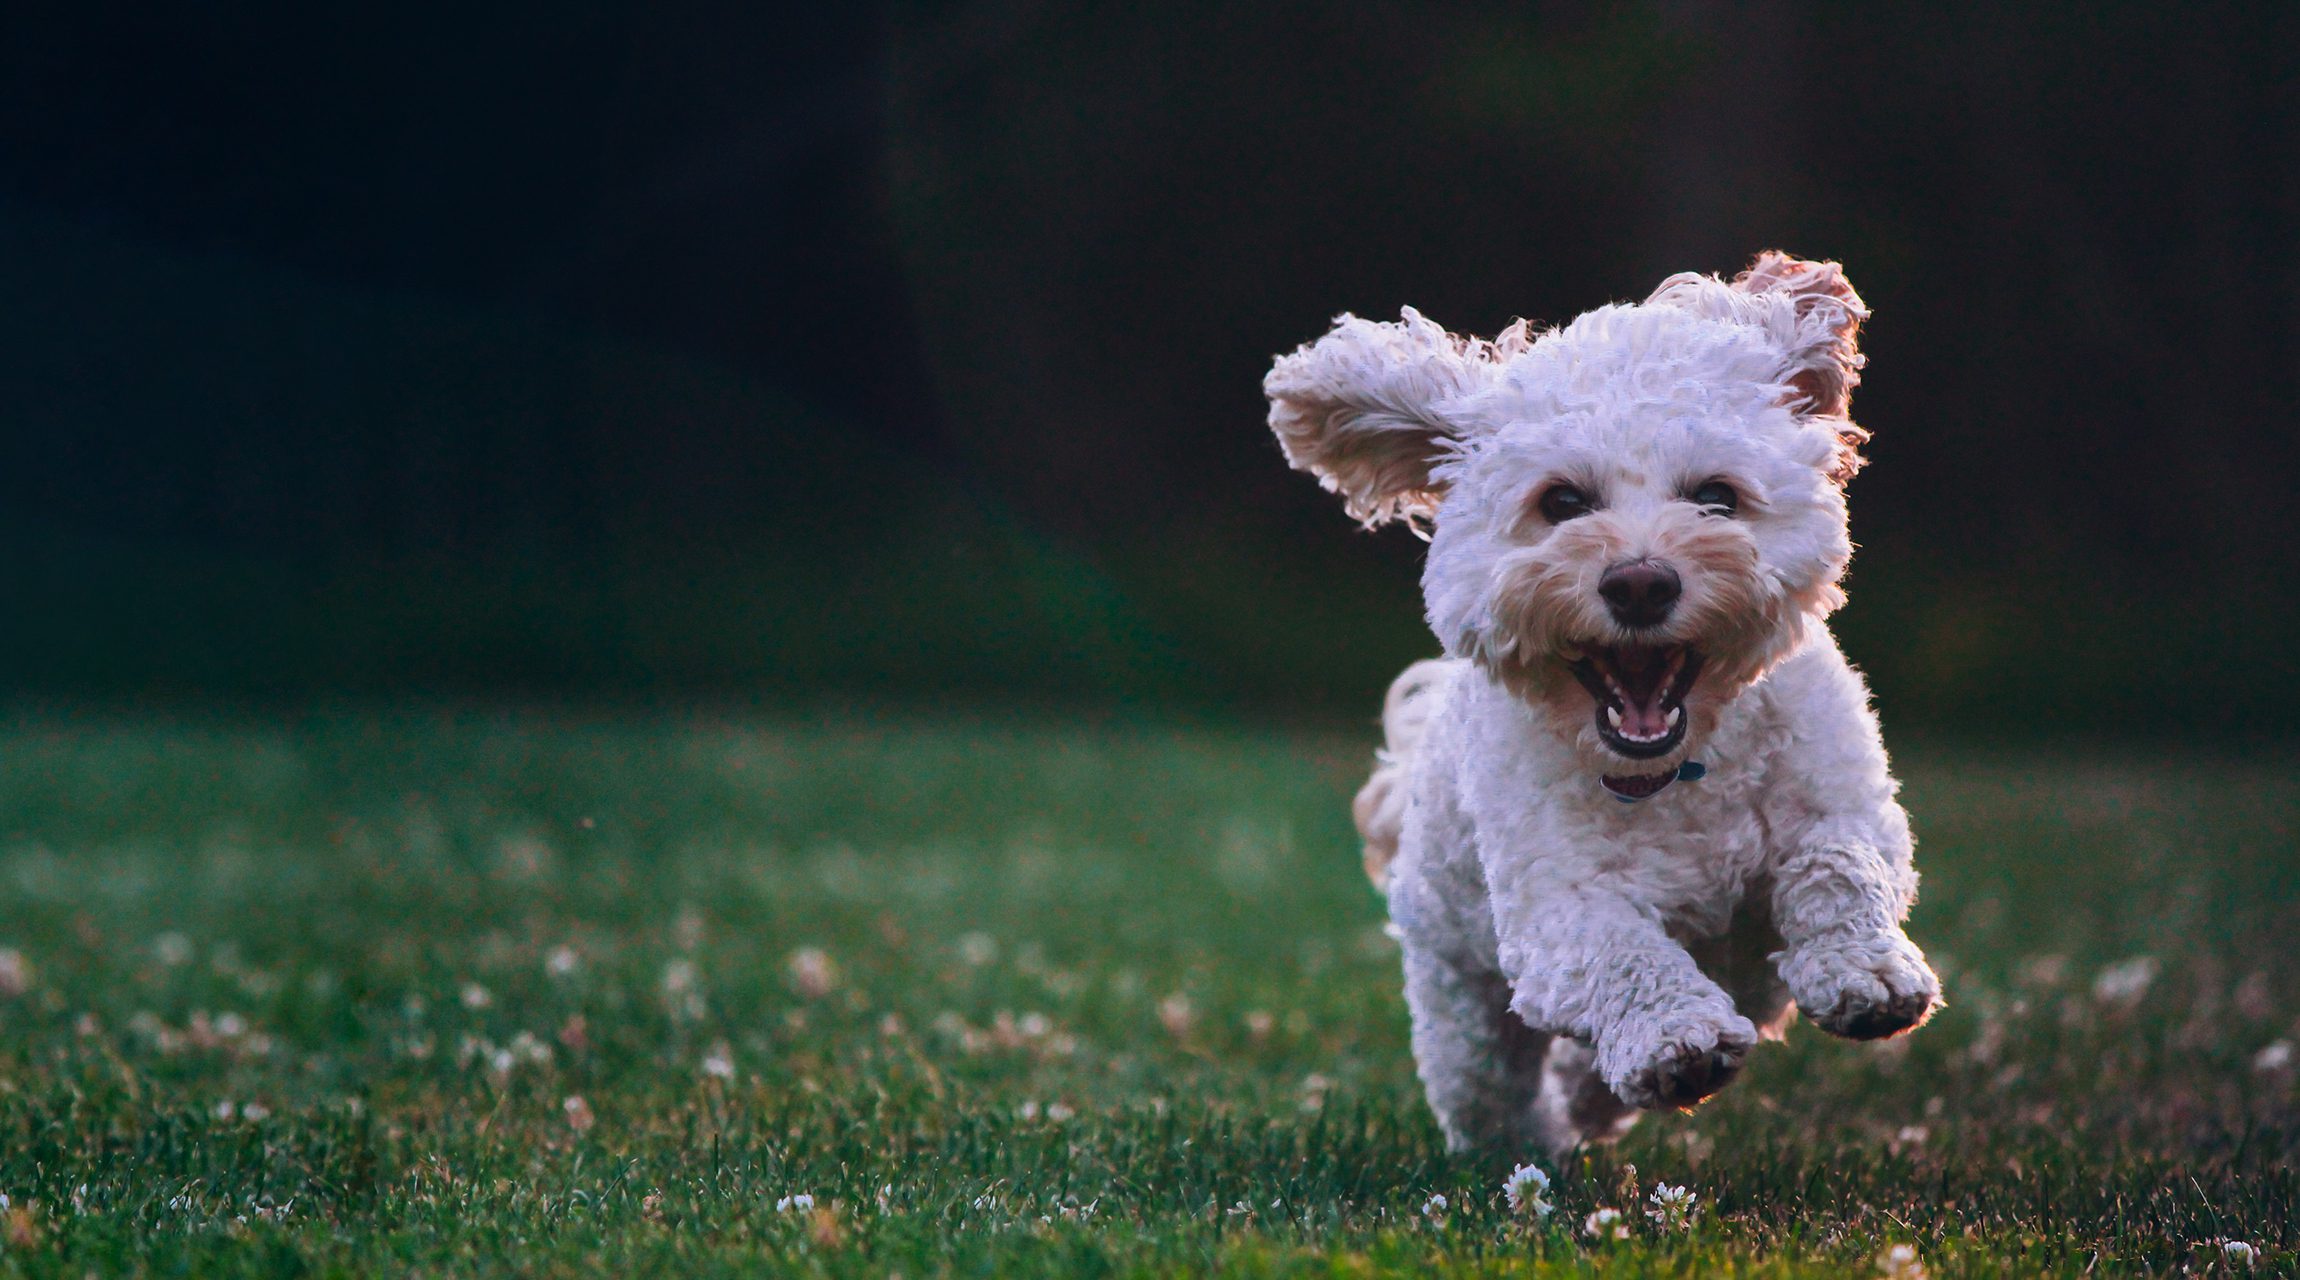 A small white poodle mix running in a grass field